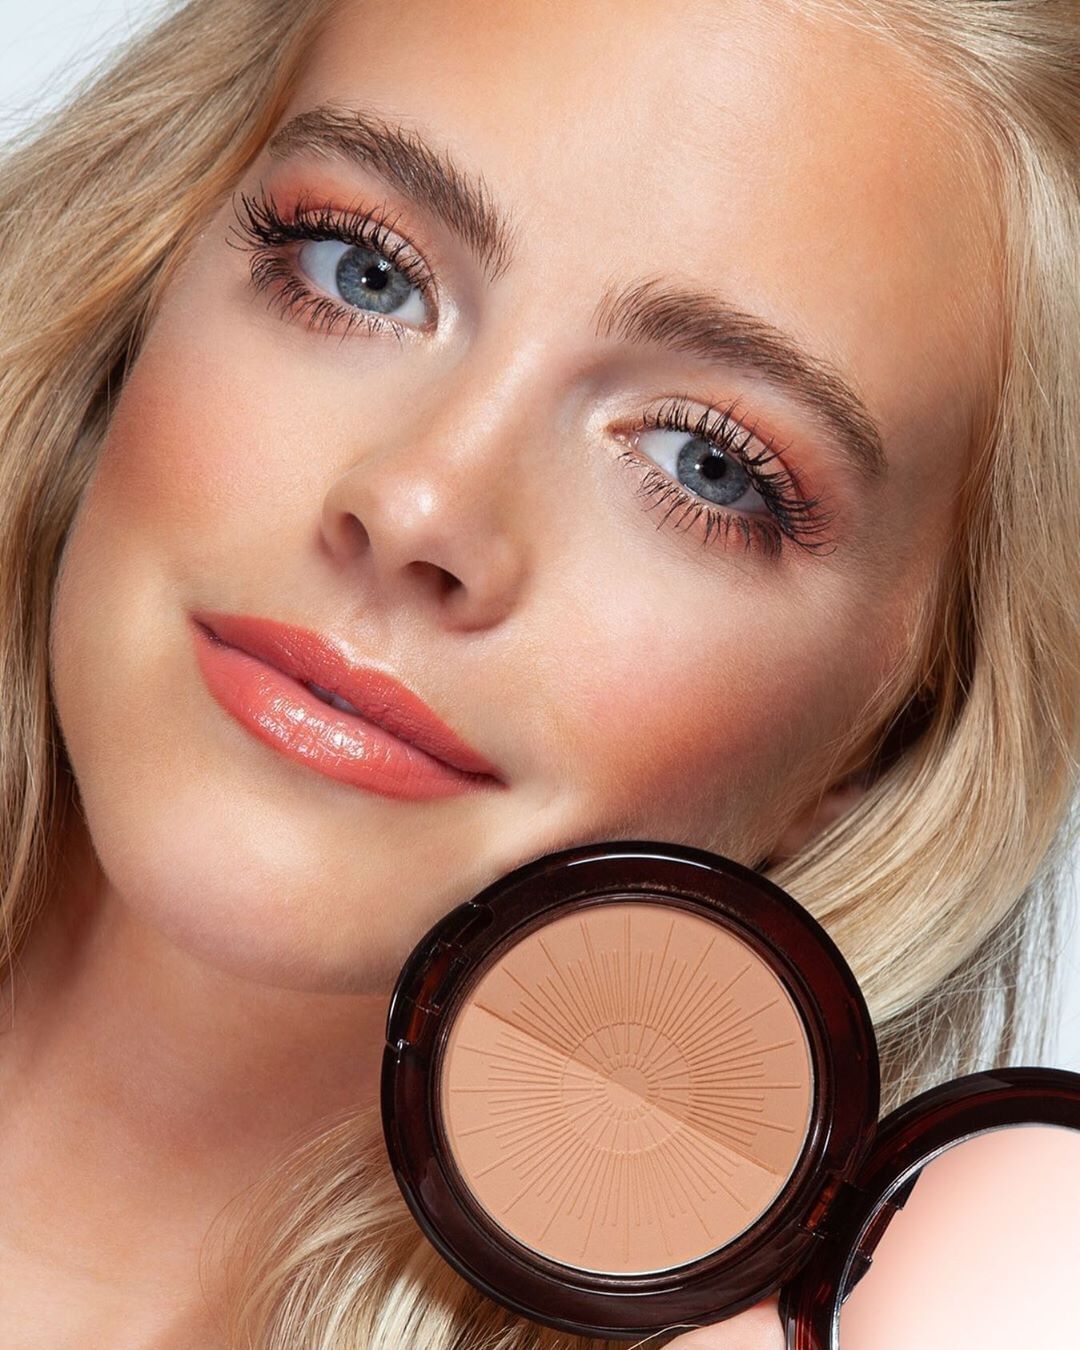 ARTDECO - Chasing the sun 🌞 Two warm, ideally harmonized colors of our ultra-light Bronzing Powder Compact give you a beautiful summer face teint and make the complexion appear particularly smooth.⠀⠀⠀...